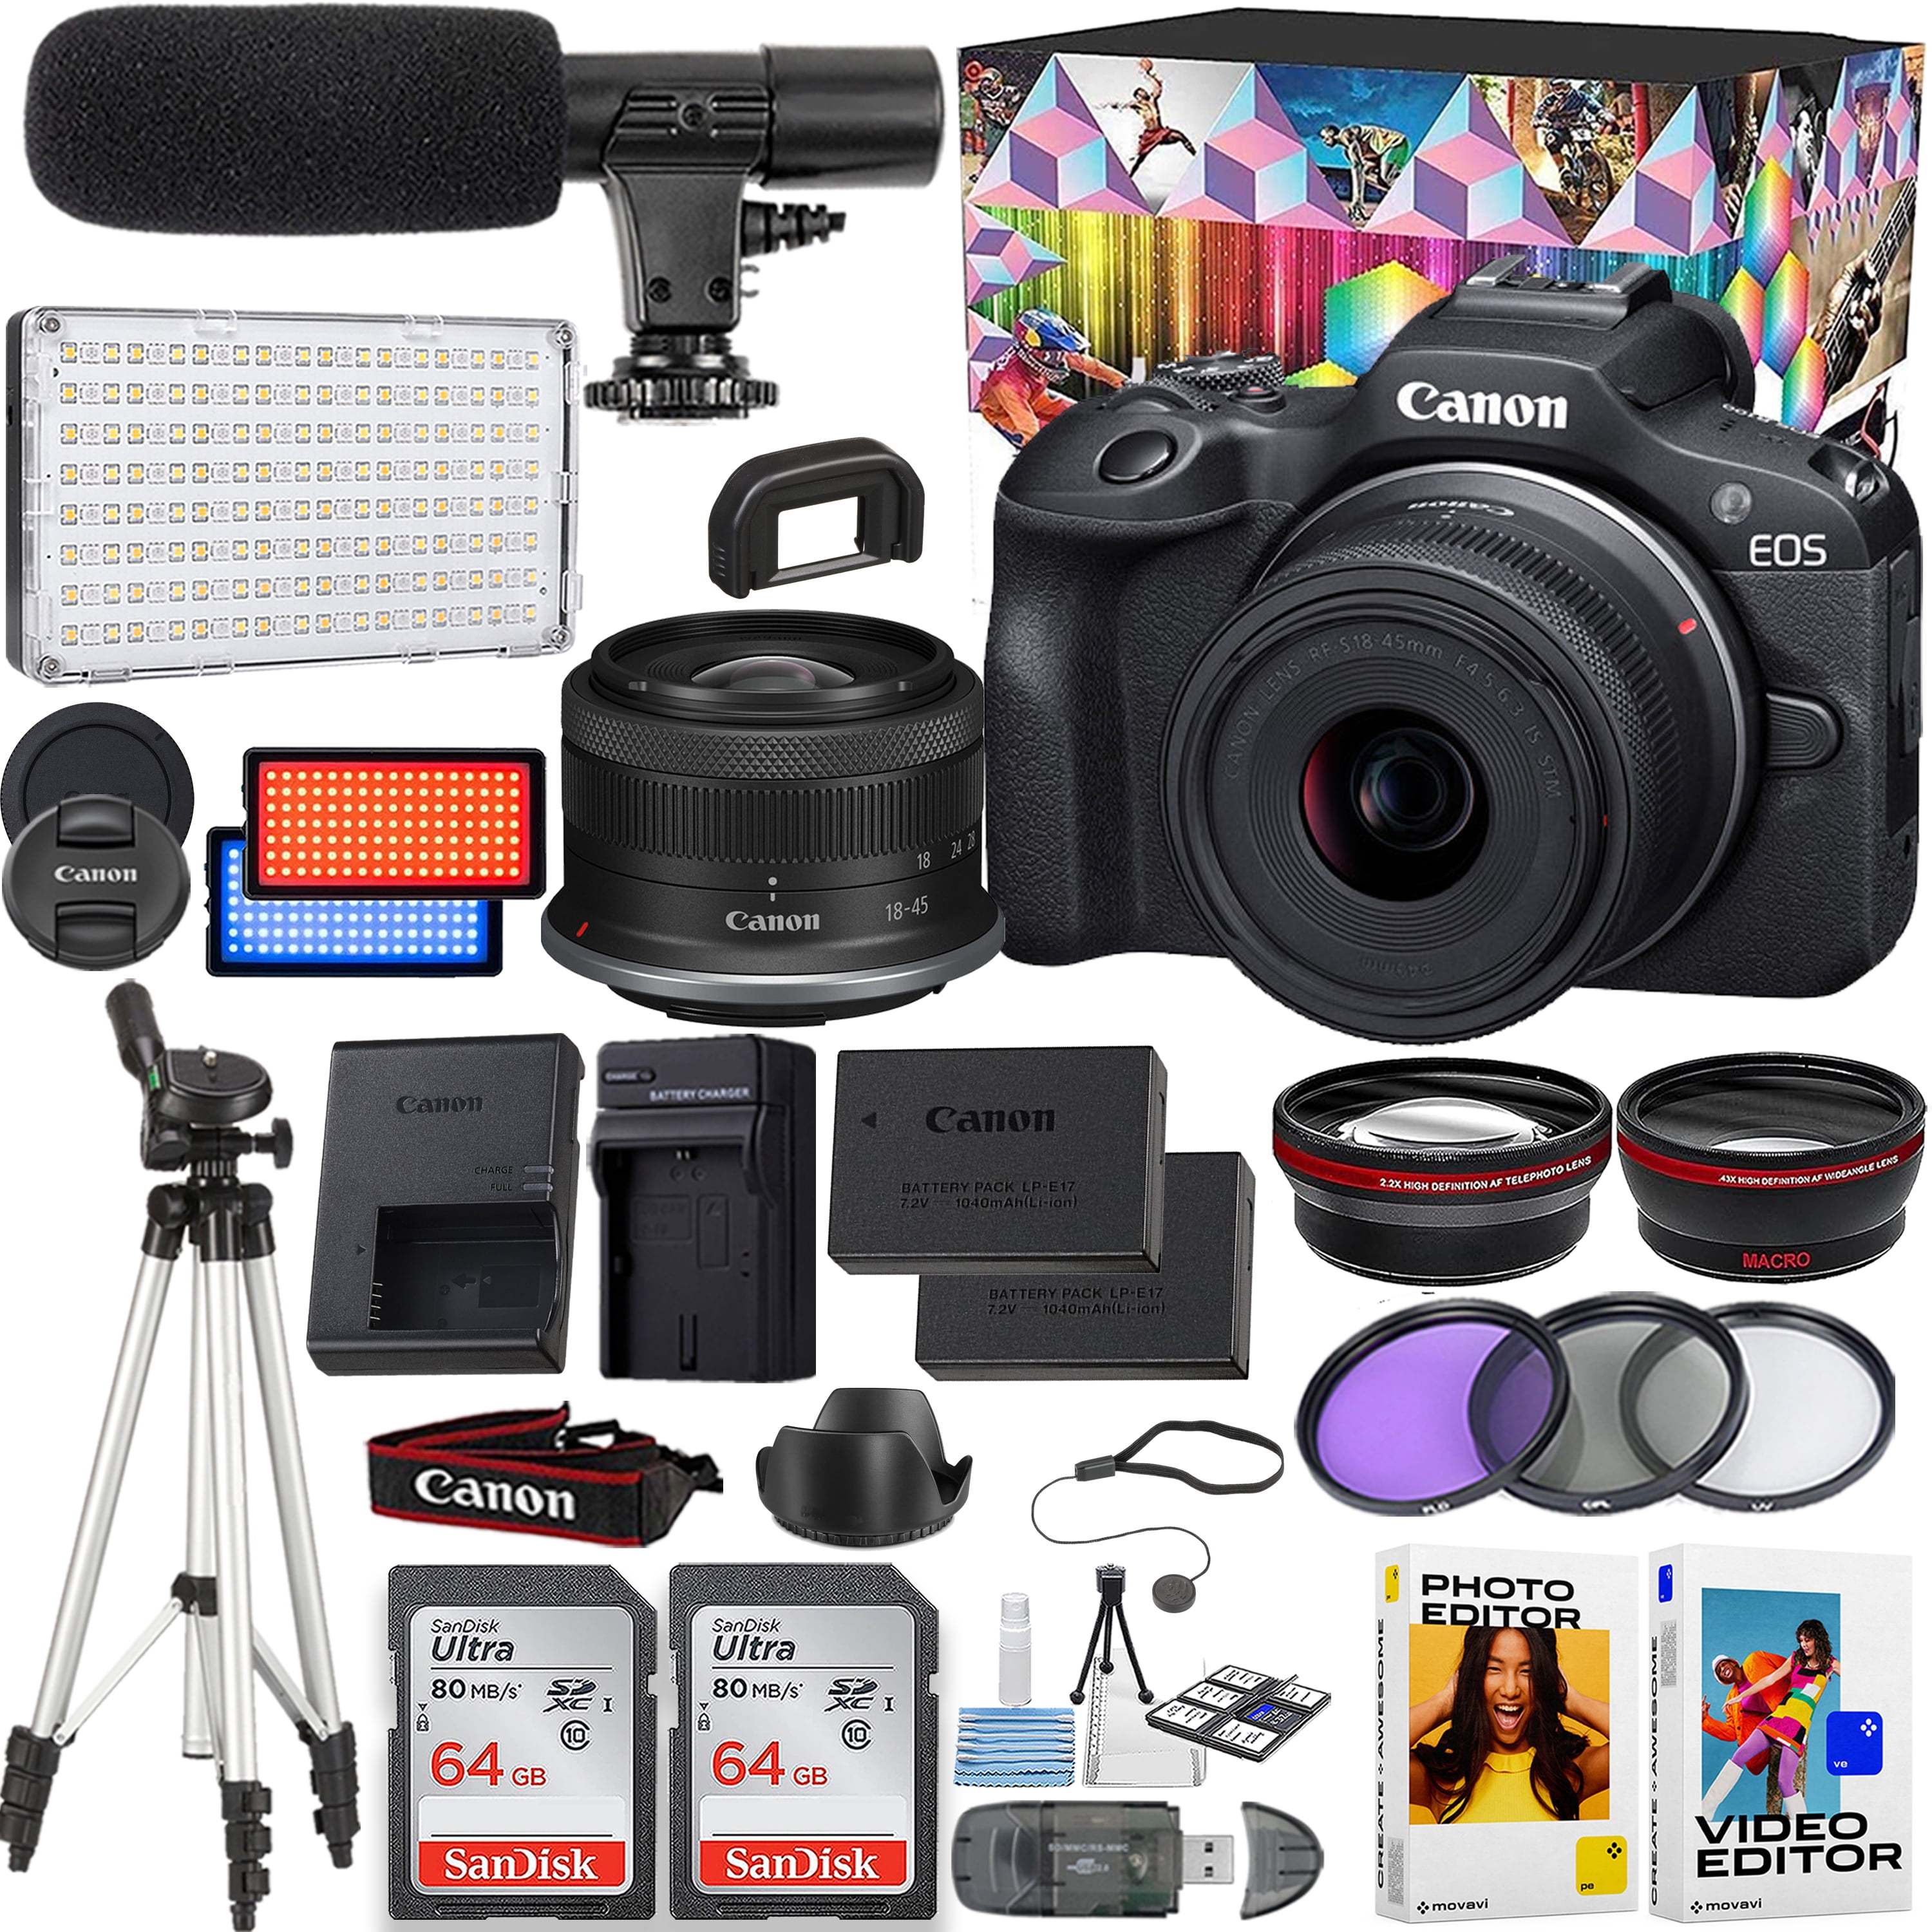  Canon EOS R100 Mirrorless Camera with 18-45mm Lens + 420-800mm  Super Telephoto Lens + 128GB Memory, LED Light, Microphone, Spare Battery,  Filters,Case, Tripod, Flash, and More (43pc Video Bundle) : Electronics